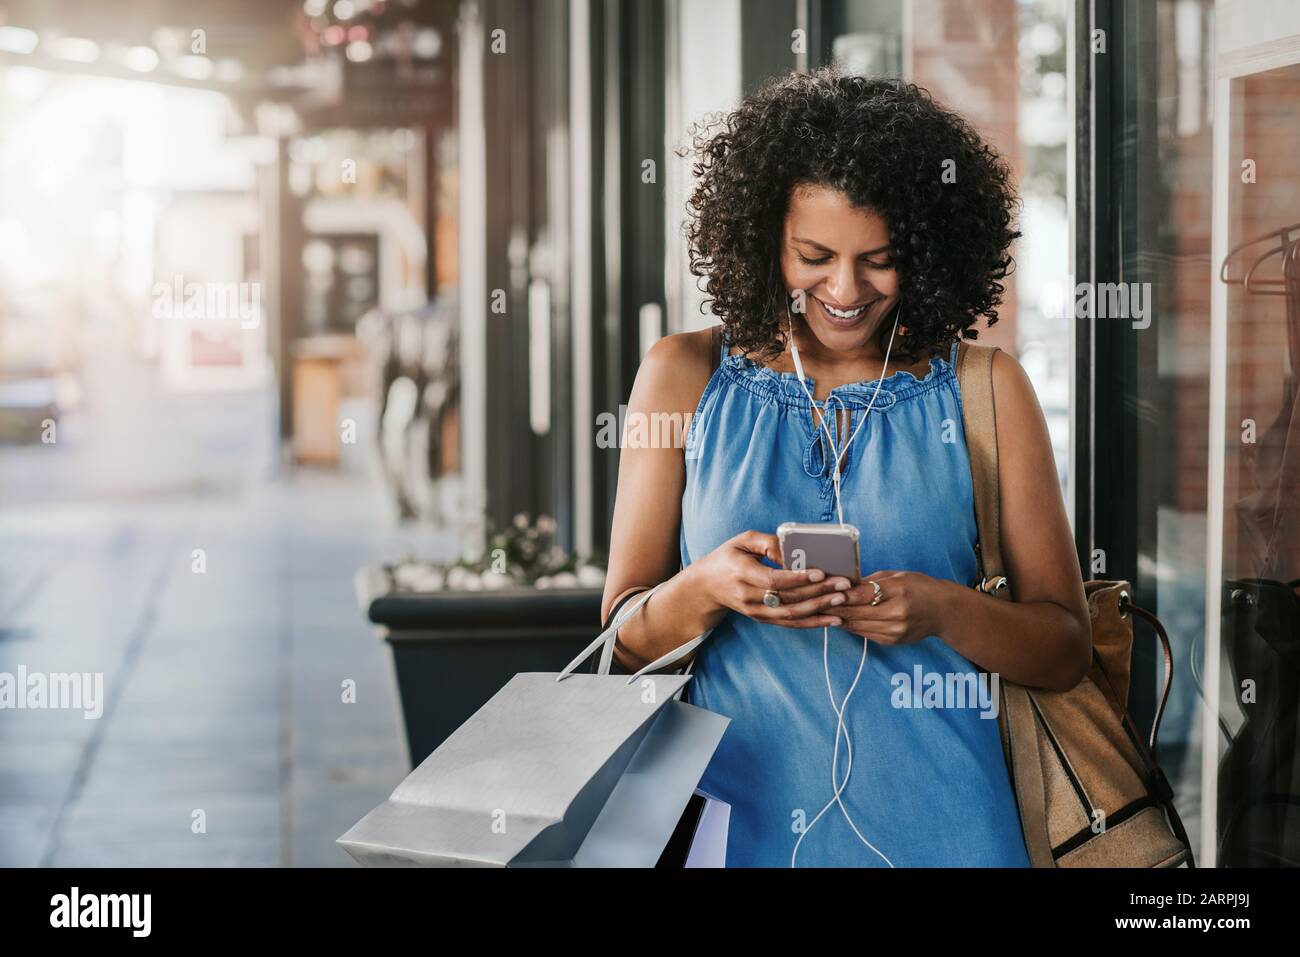 Smiling woman listening to music while out shopping for clothing Stock Photo